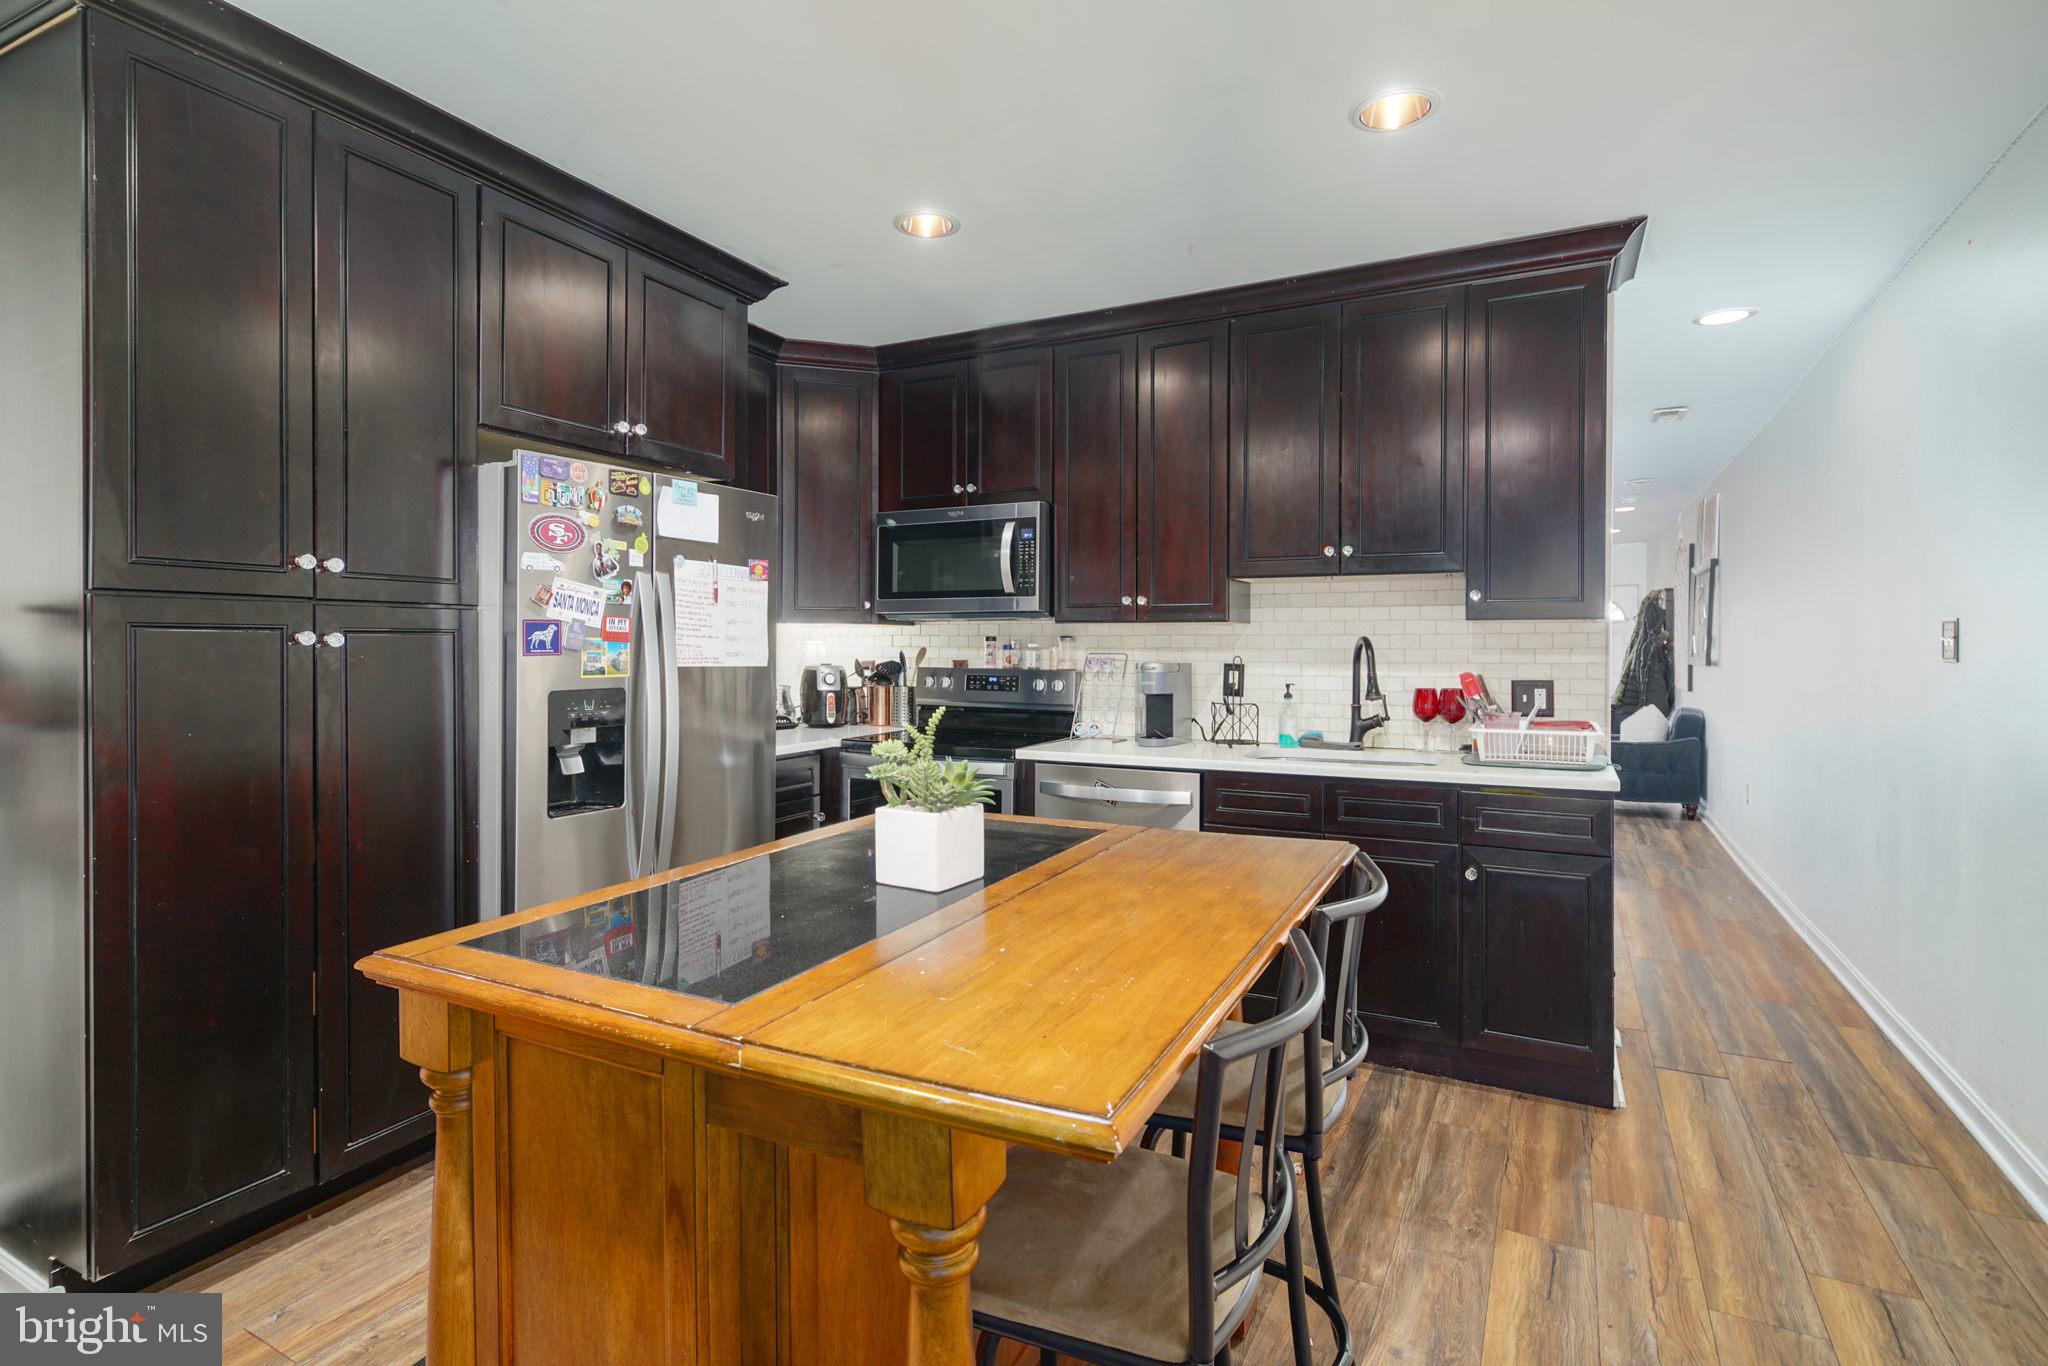 a kitchen with granite countertop stainless steel appliances a refrigerator and a stove top oven